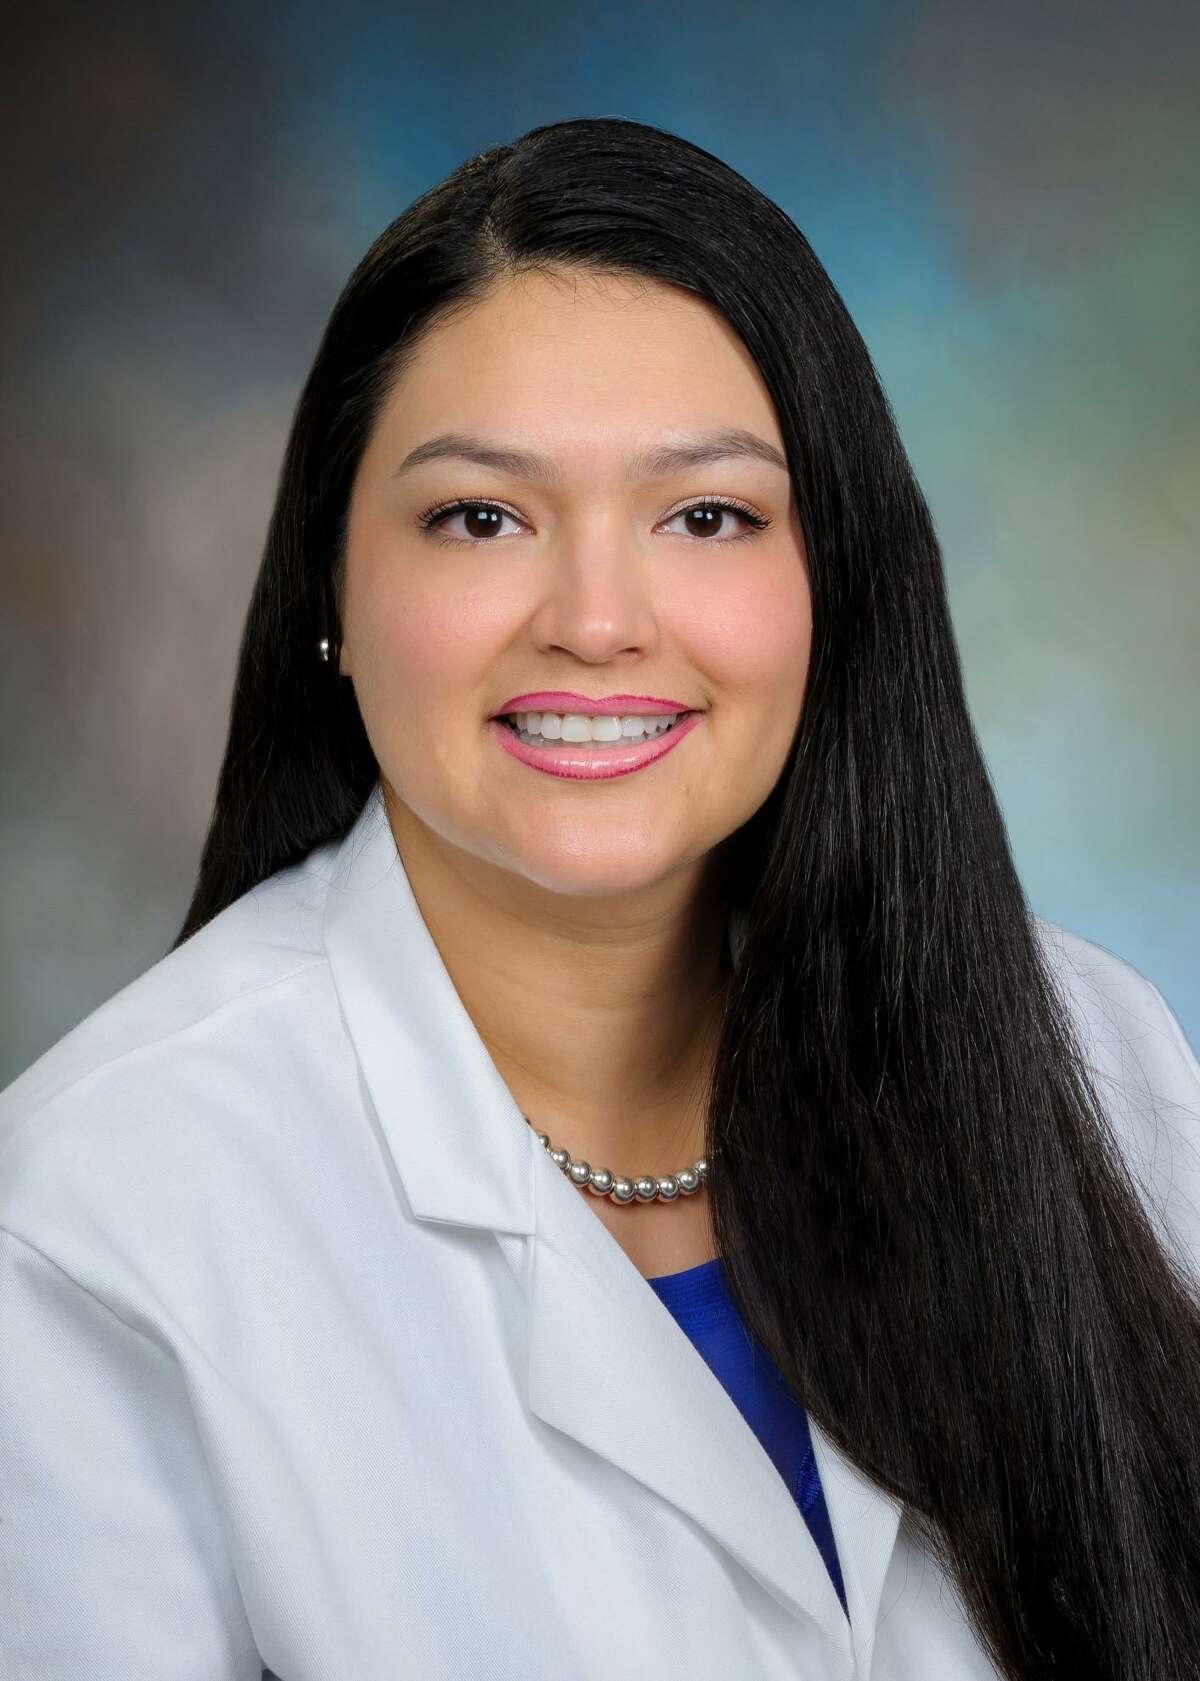 Family nurse practitioner Lauren Perez says cancer patients will always hold the first place in her heart in the medical profession.